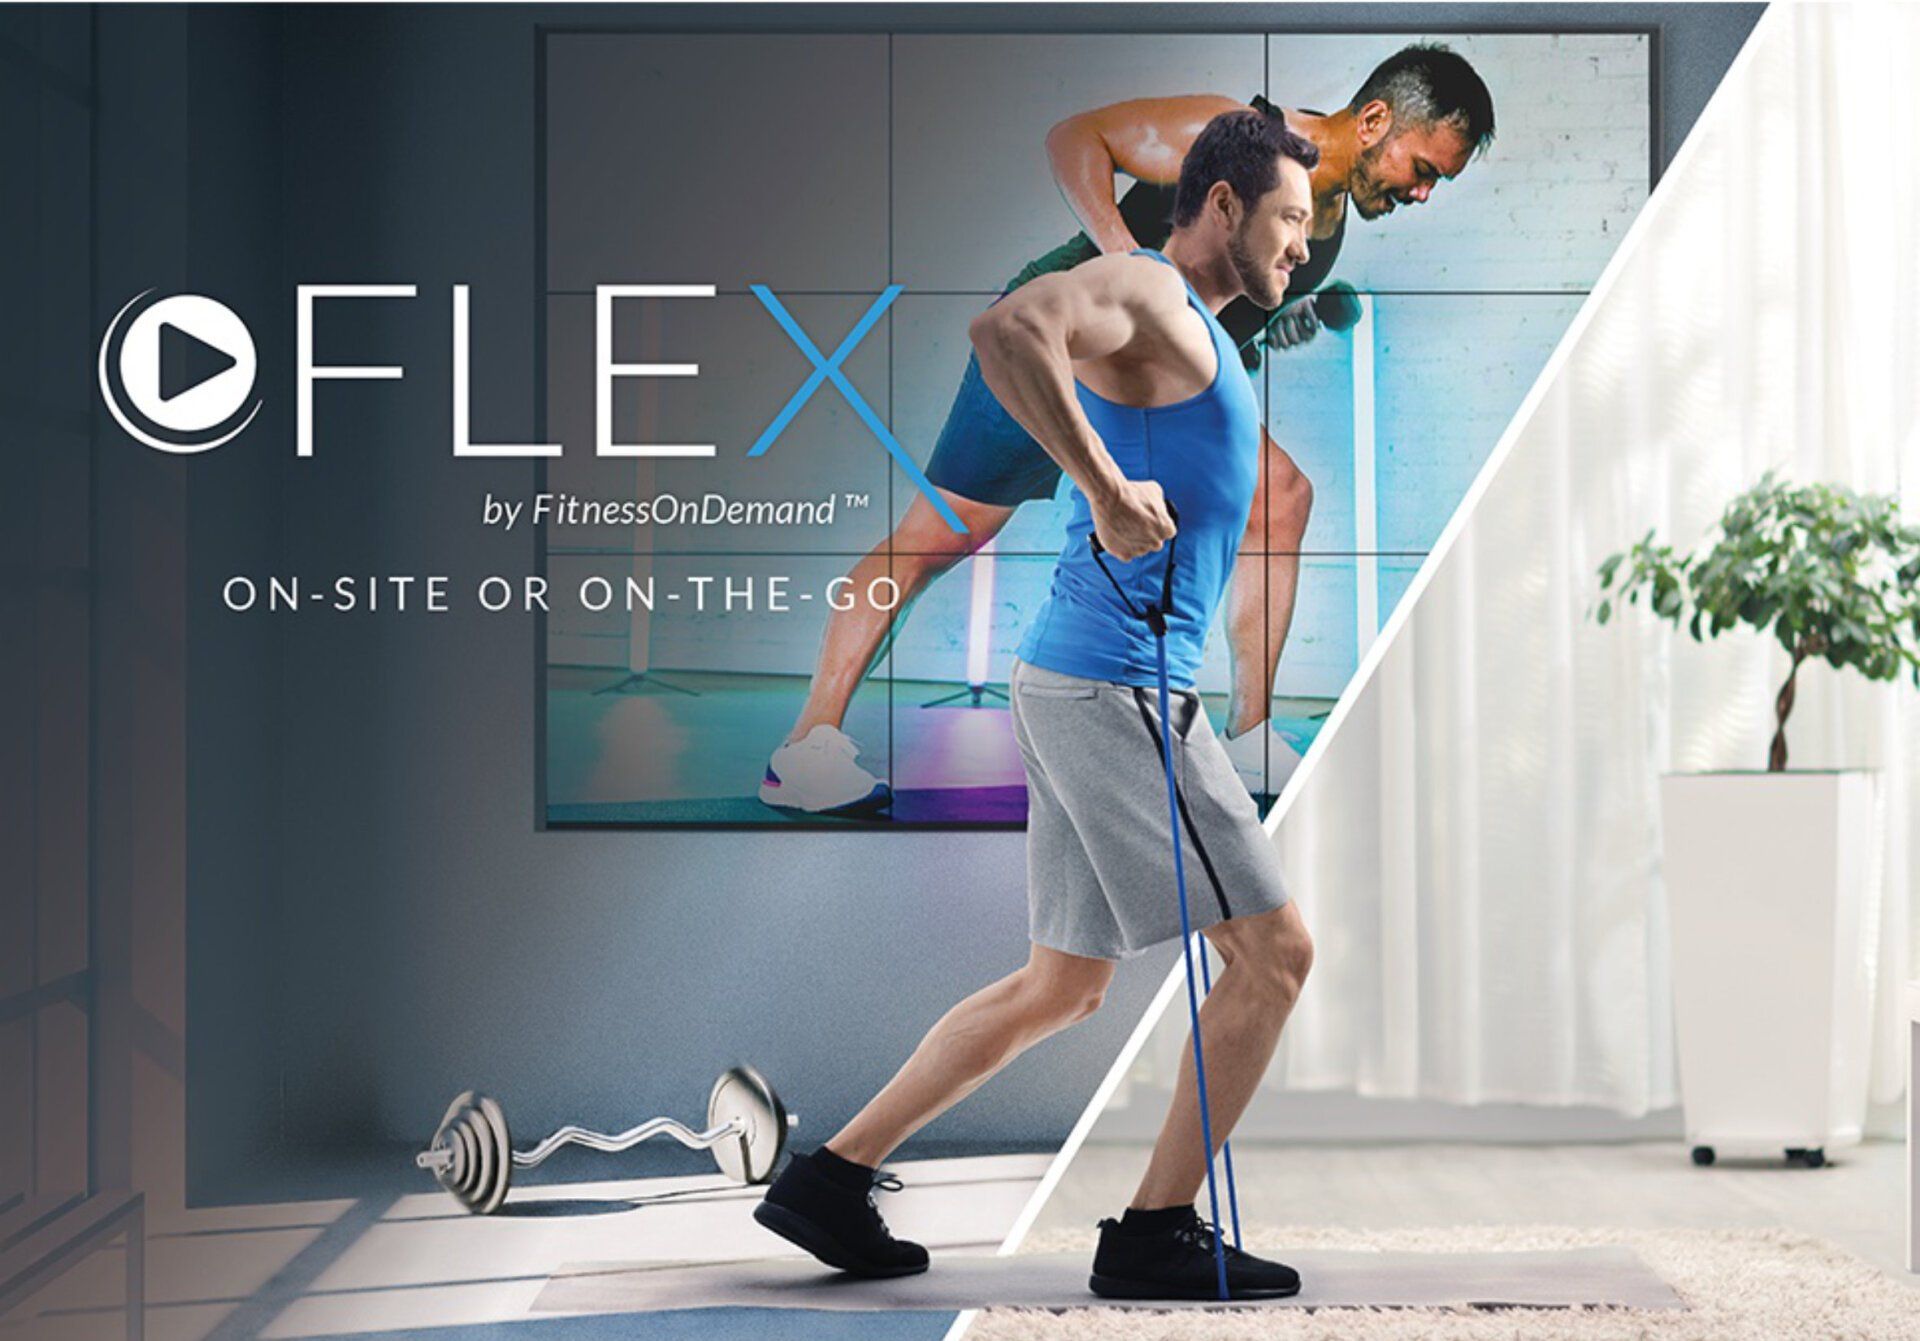 Outdoor Fitness On Demand Flex exercise solutions